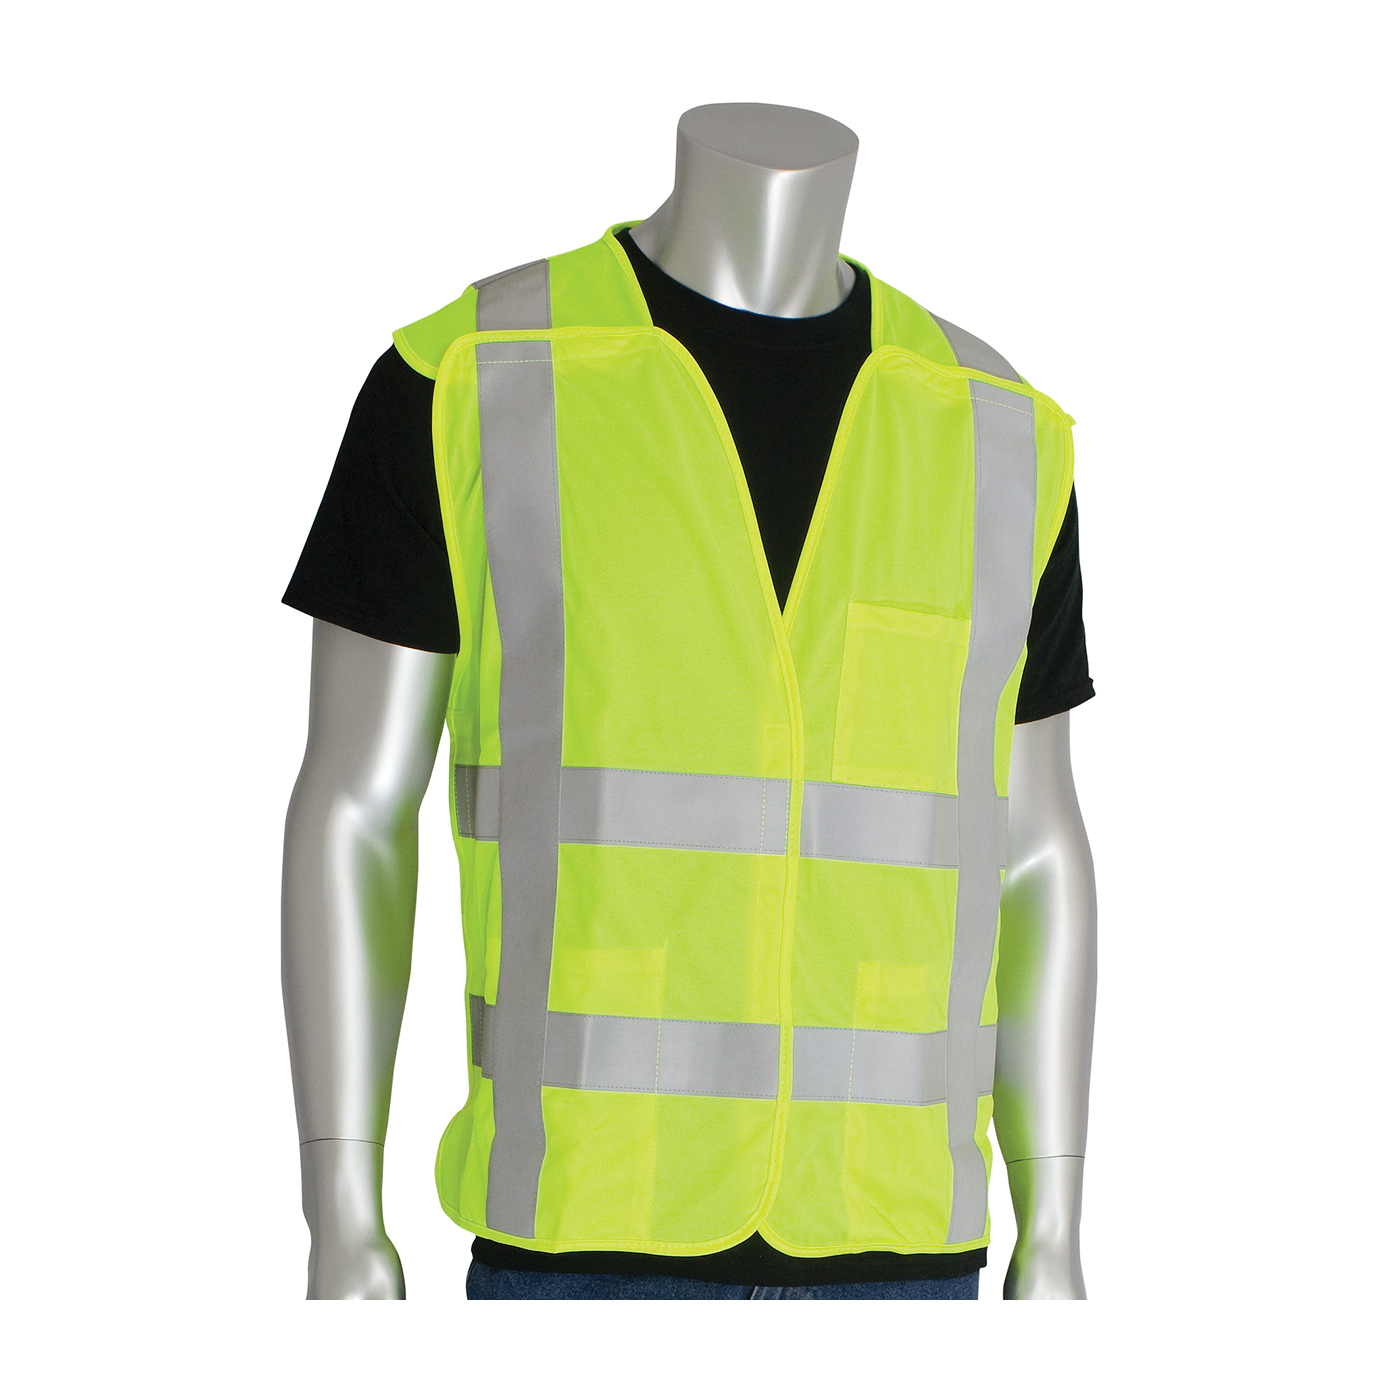 PIP® SafetyGear 305-5PVFRLY-2X/3X FR Treated Solid Vest, 2XL/3XL, Hi-Viz Yellow, Polyester, Hook and Loop Closure, ANSI Class: Class 2, Specifications Met: ANSI/ISEA 107